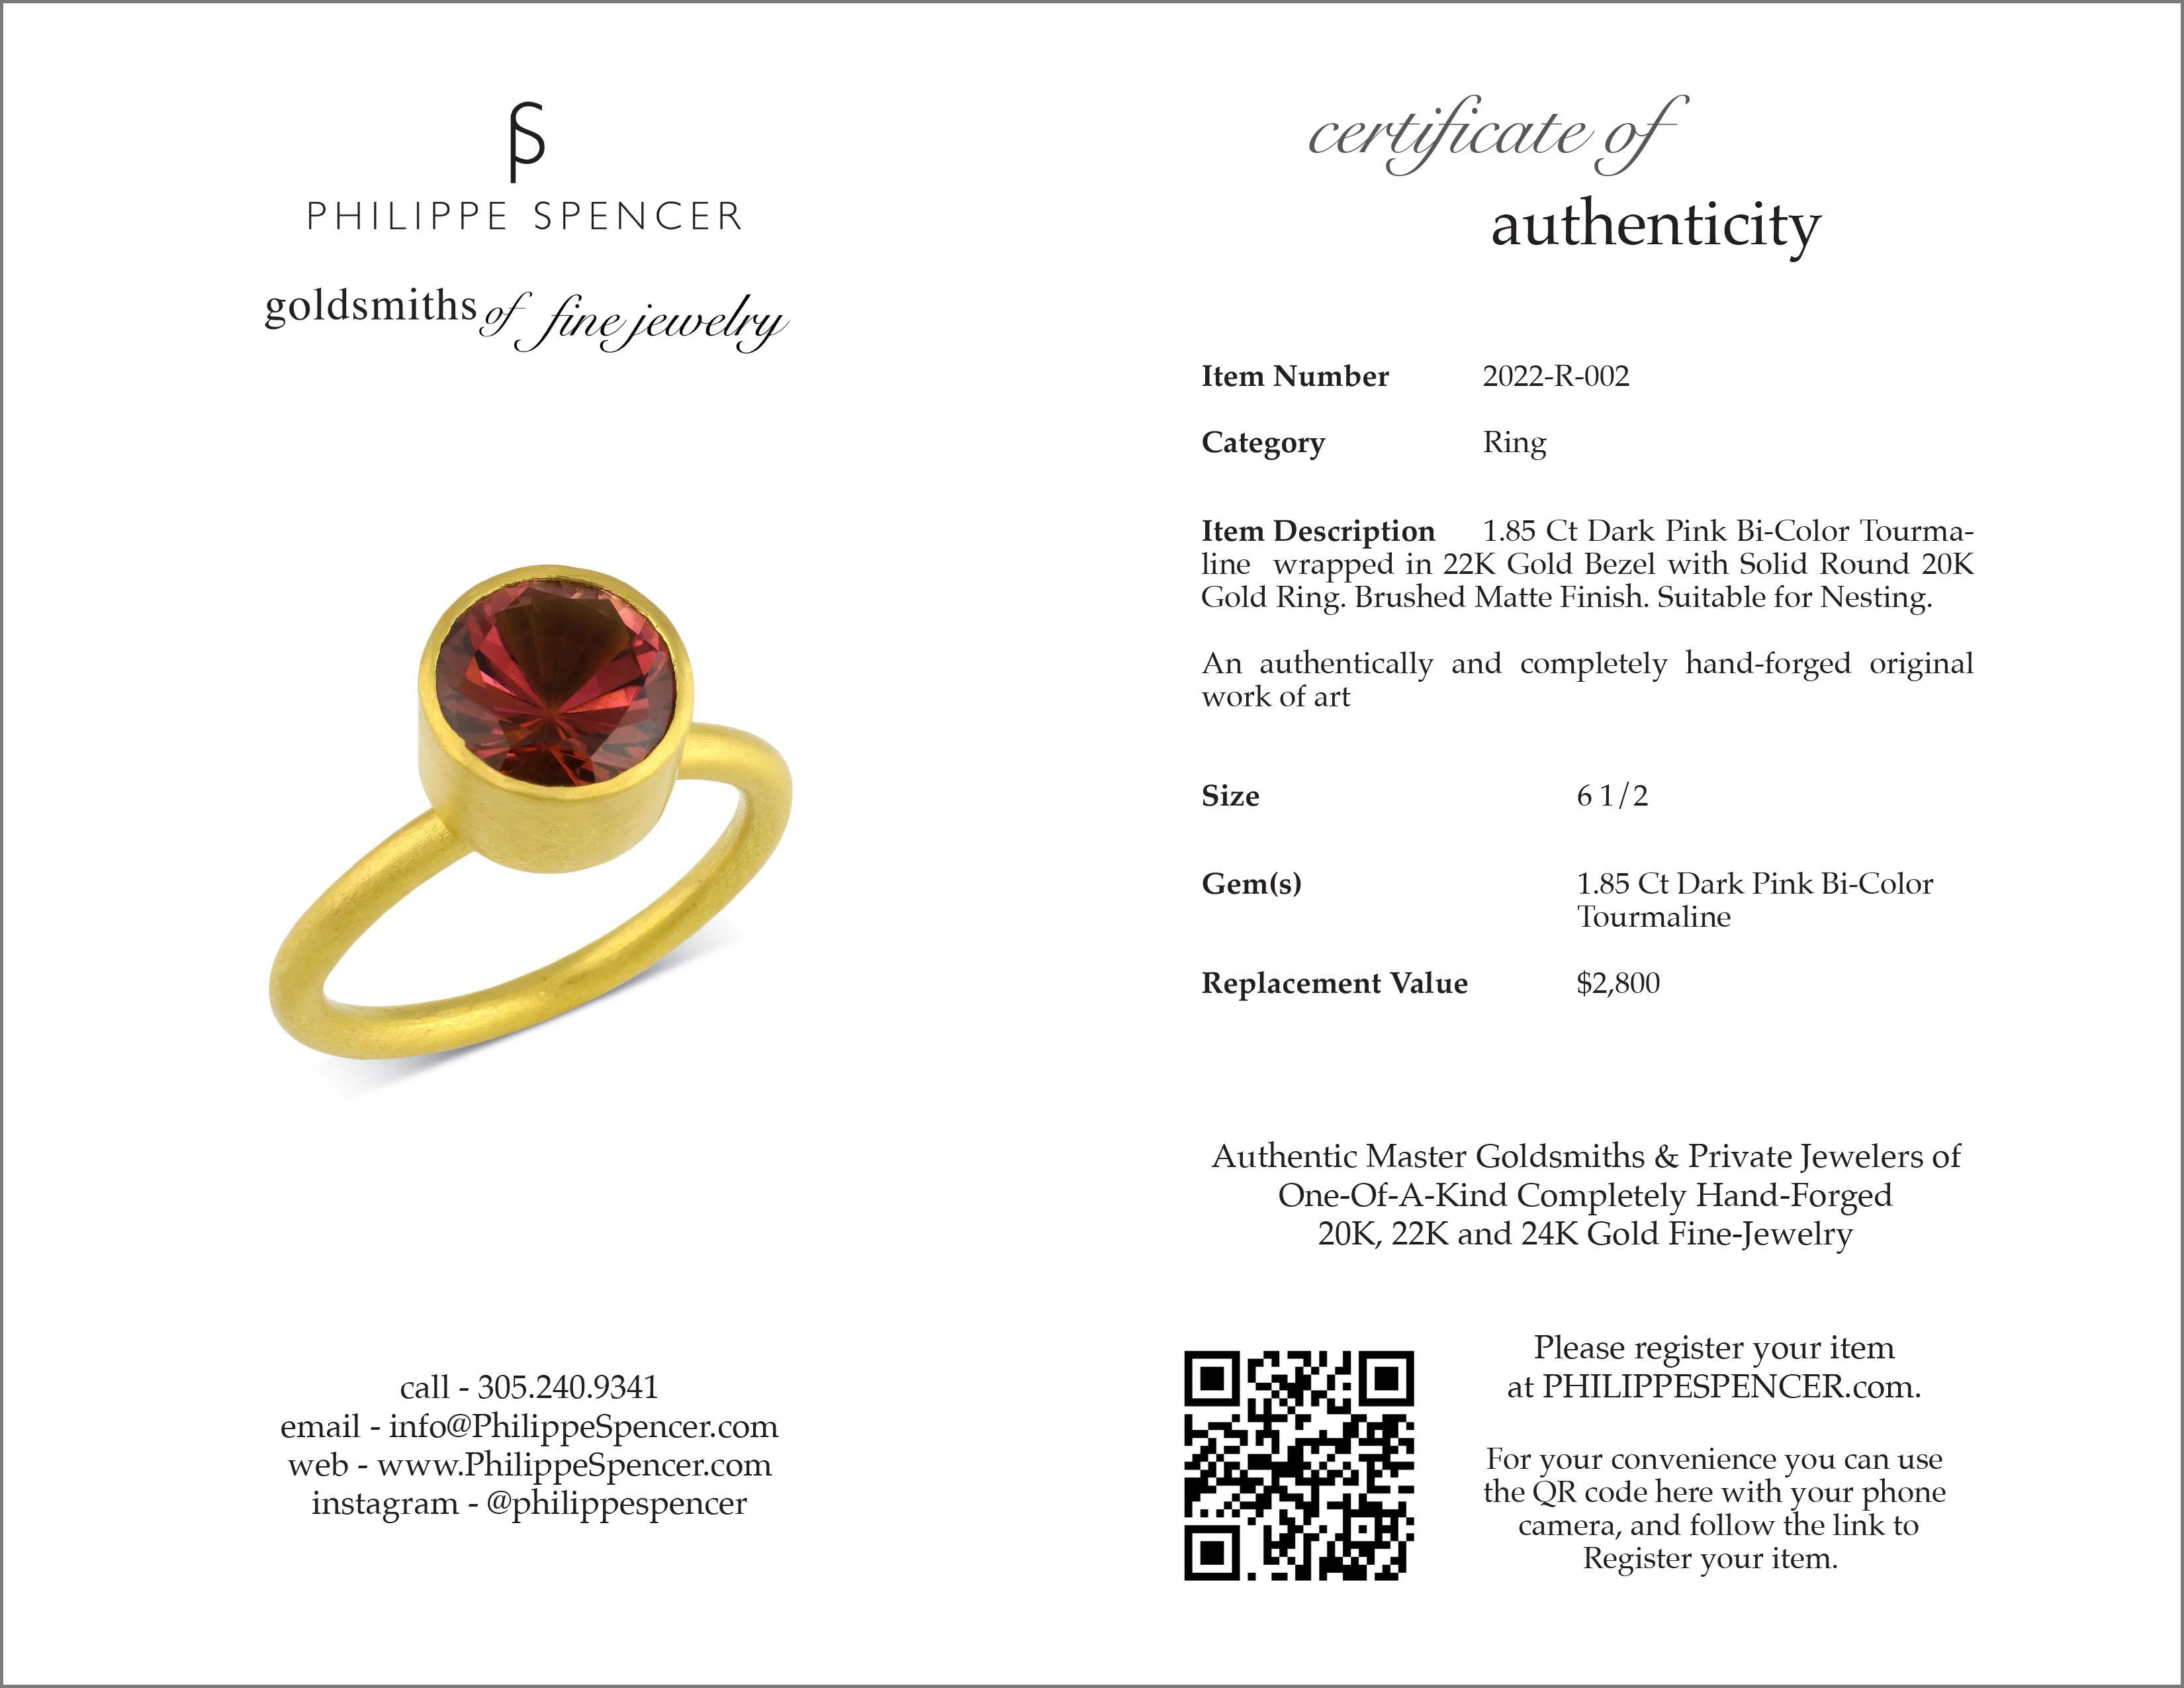 Artisan PHILIPPE SPENCER 1.85 Ct. Pink Tourmaline in 22K and 20K Gold Solitaire Ring For Sale